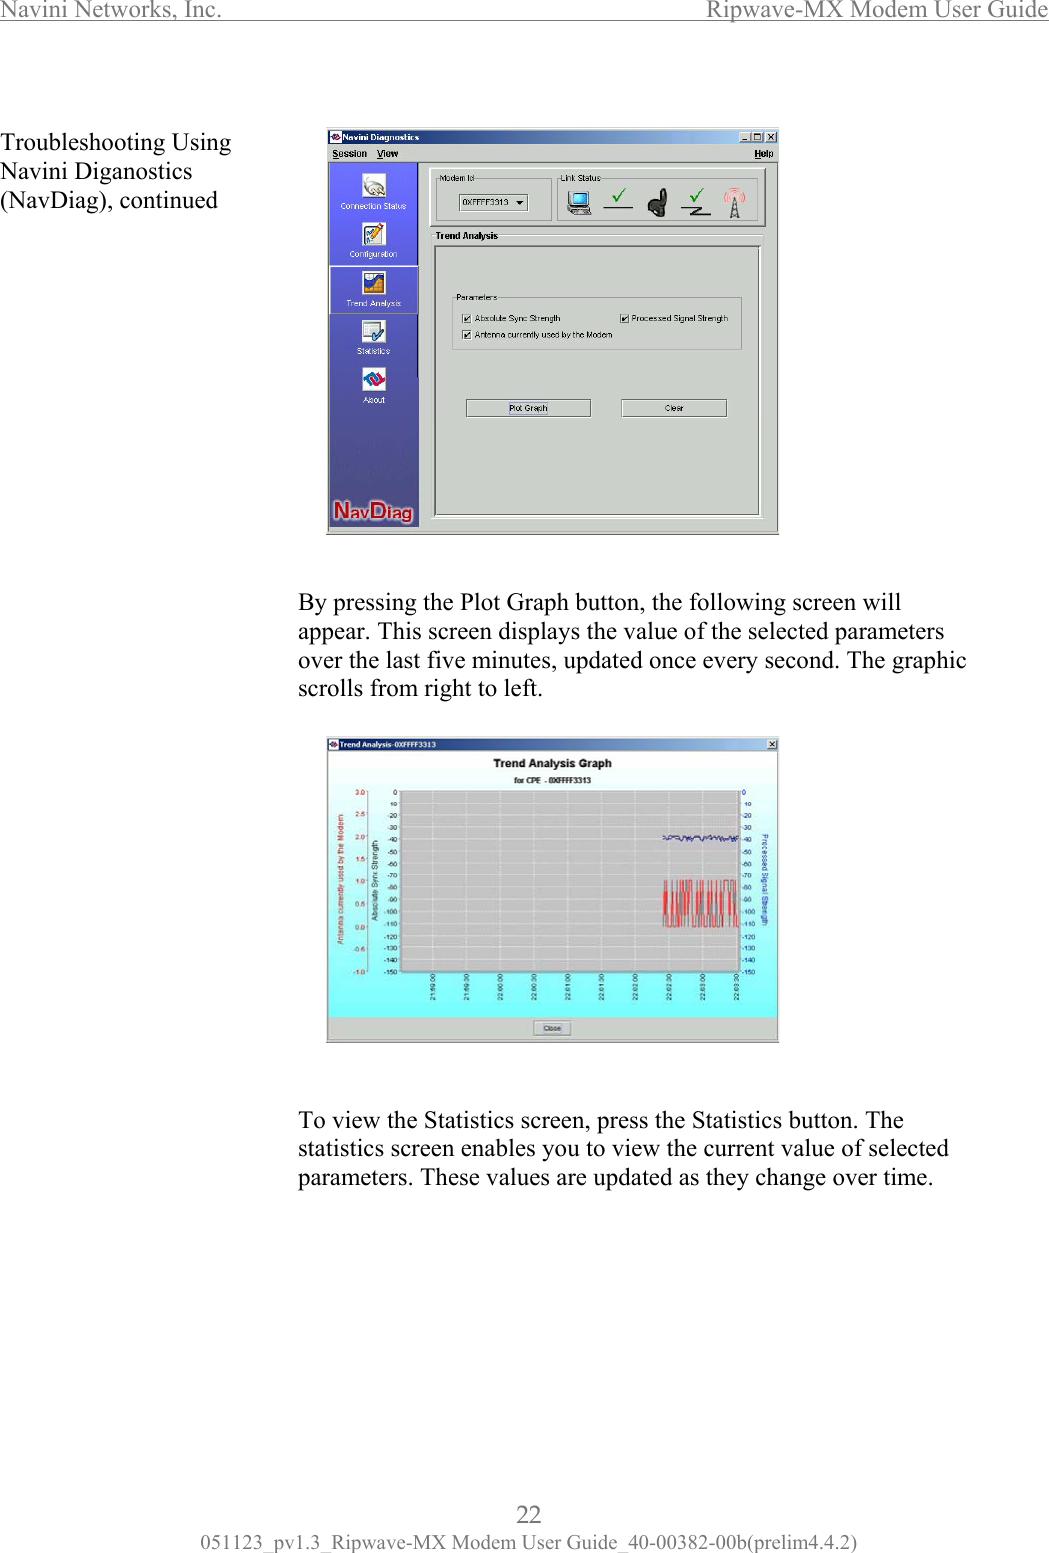 Navini Networks, Inc.                  Ripwave-MX Modem User Guide  Troubleshooting Using Navini Diganostics (NavDiag), continued                                                    y pressing the Plot Graph button, the following screen will ppear. This screen displays the value of the selected parameters ver the last five minutes, updated once every second. The graphic rolls from right to left.          Baosc              To view the Statistics screen, press the Statistics button. The statistics screen enables you to view the current value of selectedparameters. These values are updated as they change over time.       22 051123_pv1.3_Ripwave-MX Modem User Guide_40-00382-00b(prelim4.4.2) 